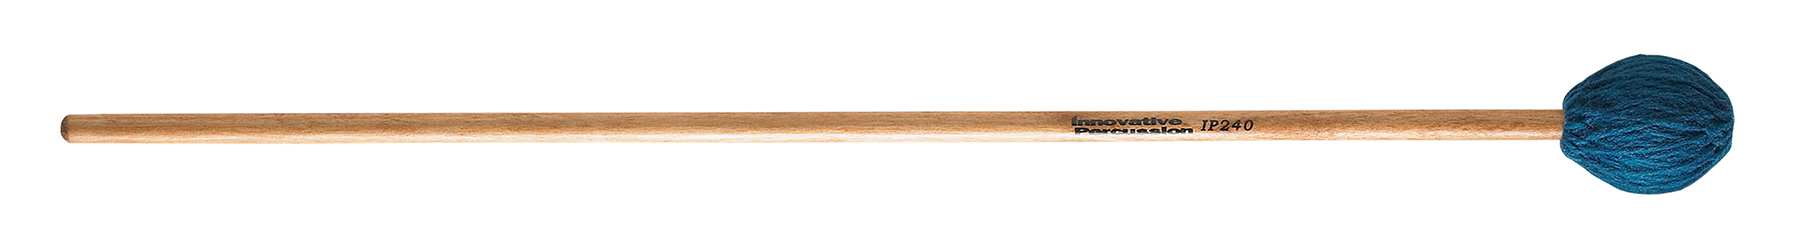 Innovative Percussion IP240 Soloist Mallet